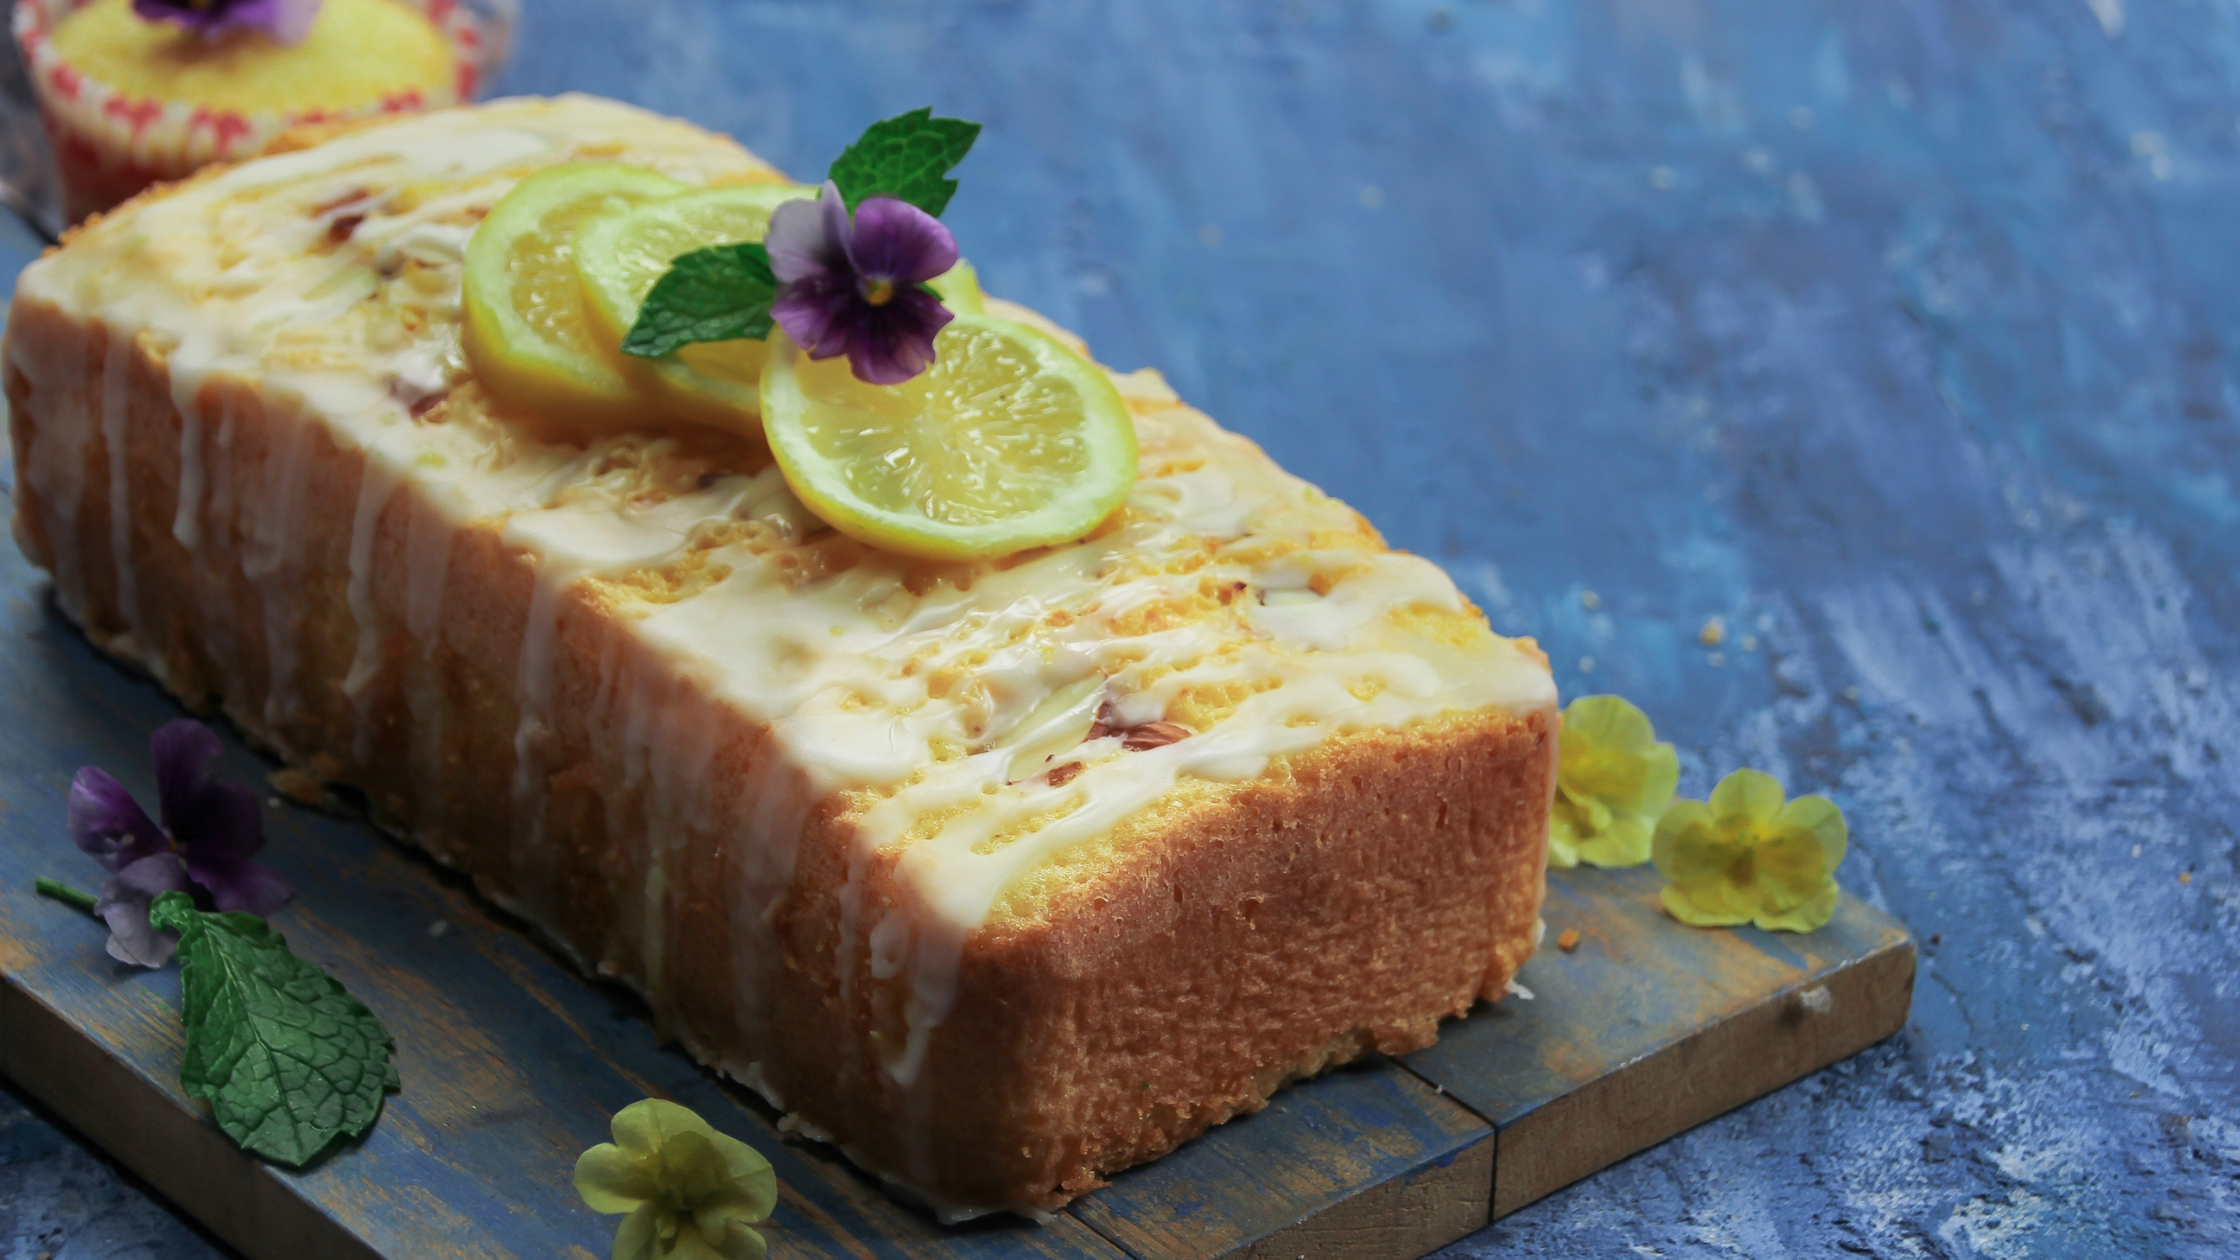 You are currently viewing Recipe of the Month: Pistachio, Courgette & Lemon Cake